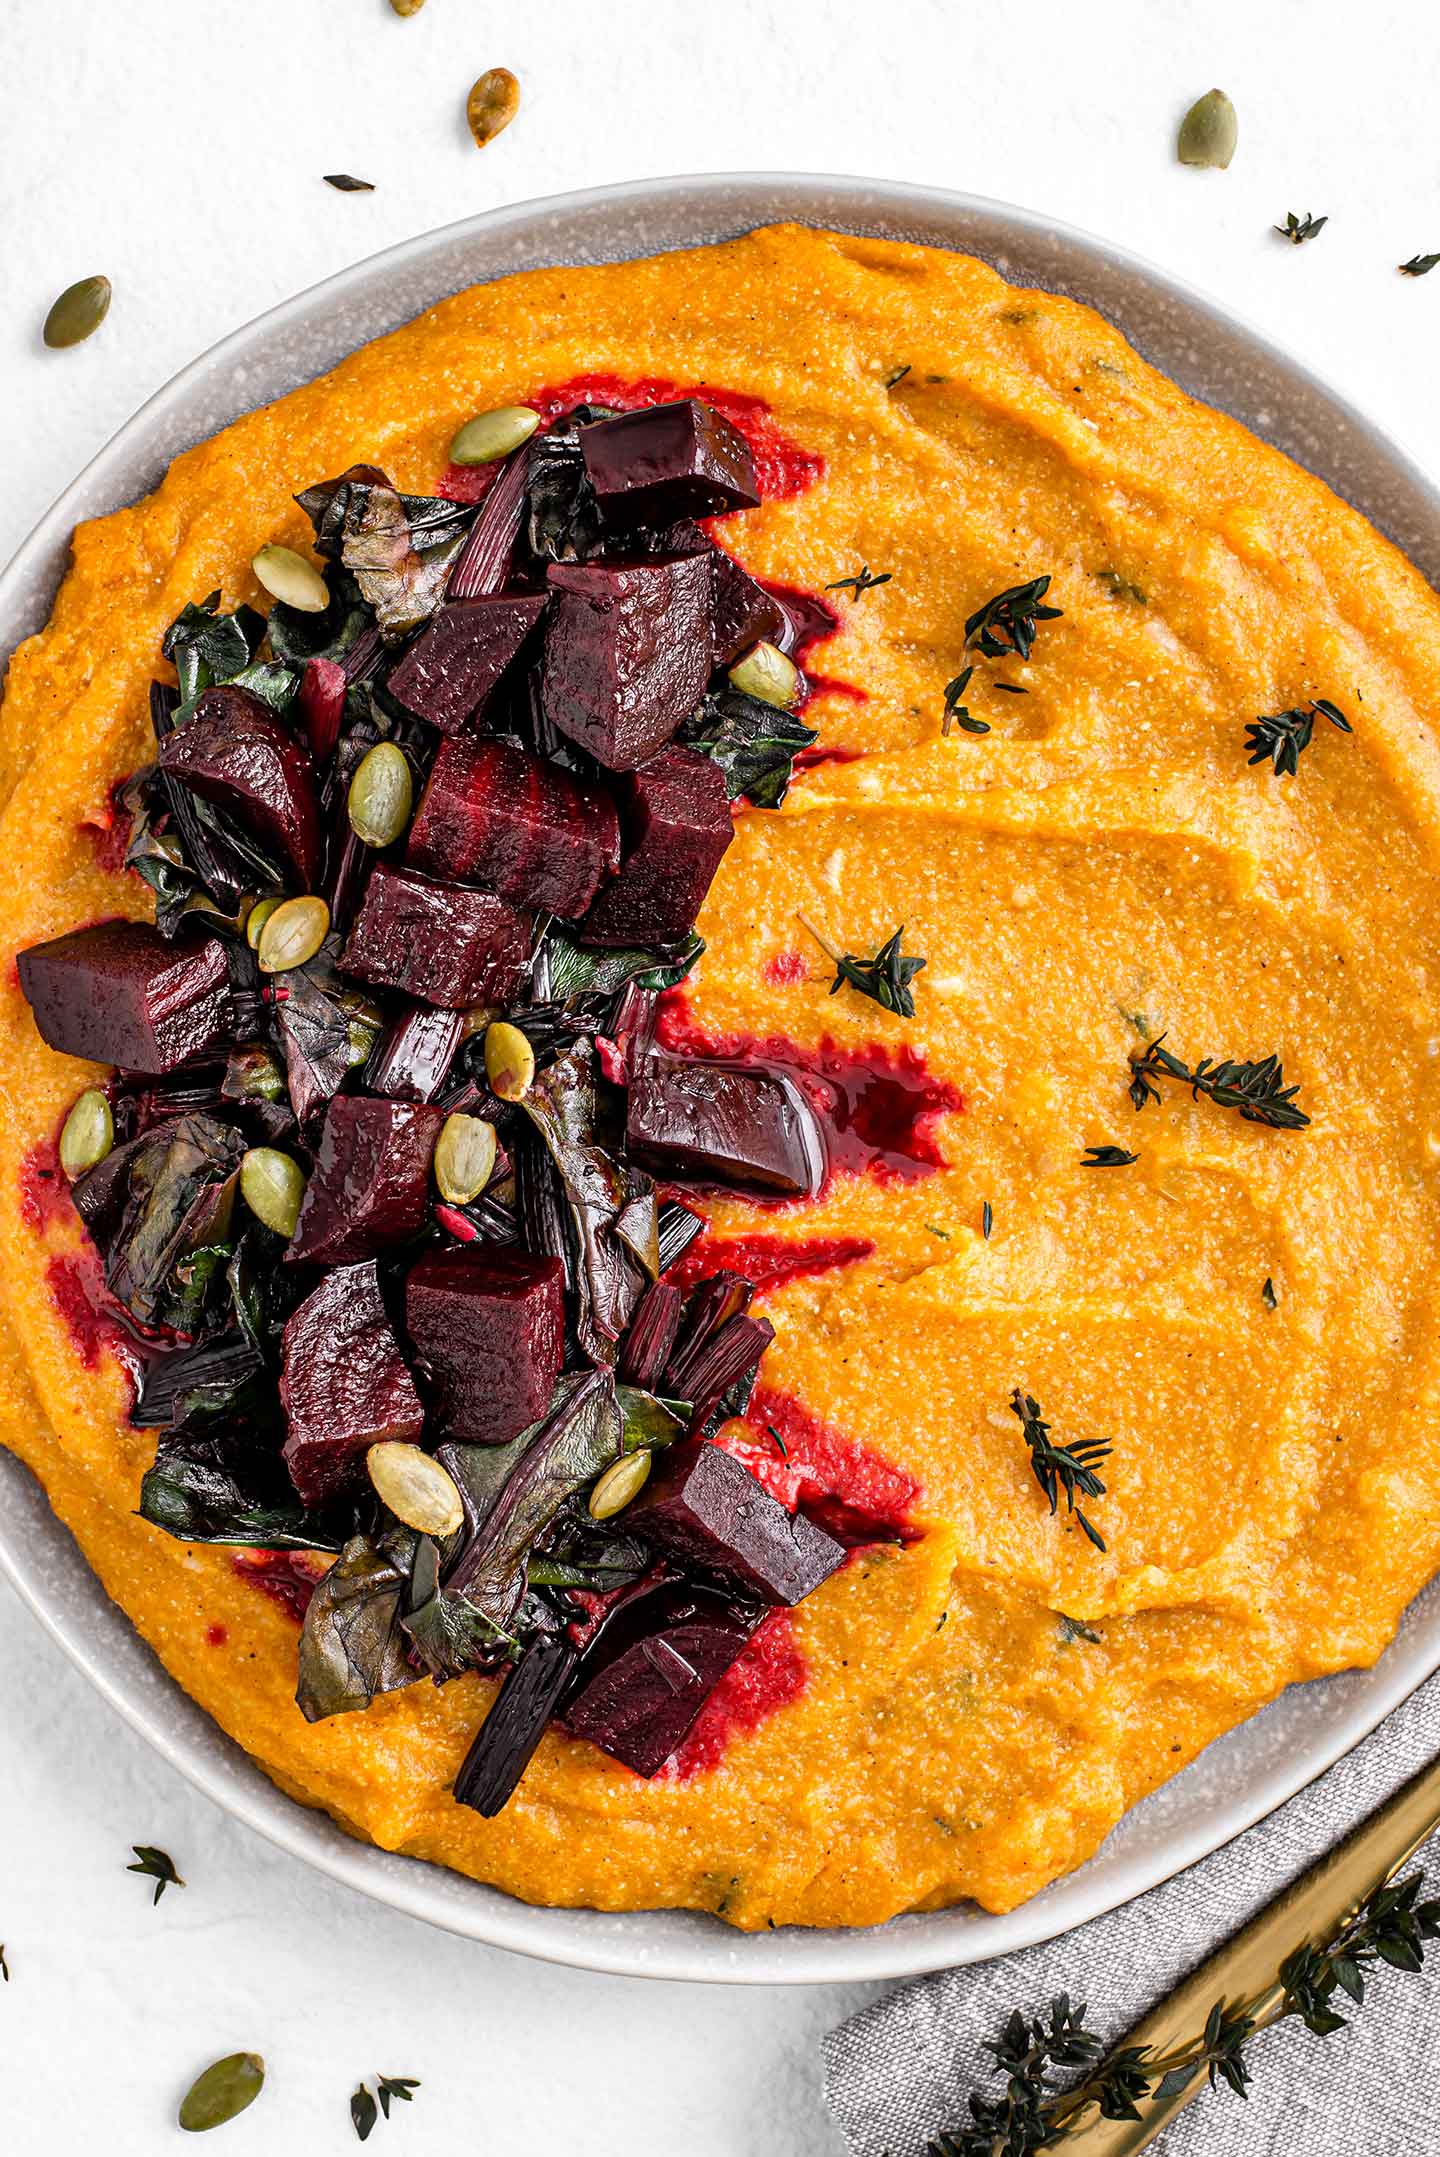 Top down view of pumpkin beet polenta filling a dish. Roasted beets and sauteed beet greens sit atop the orange coloured polenta. Fresh thyme garnishes the dish.